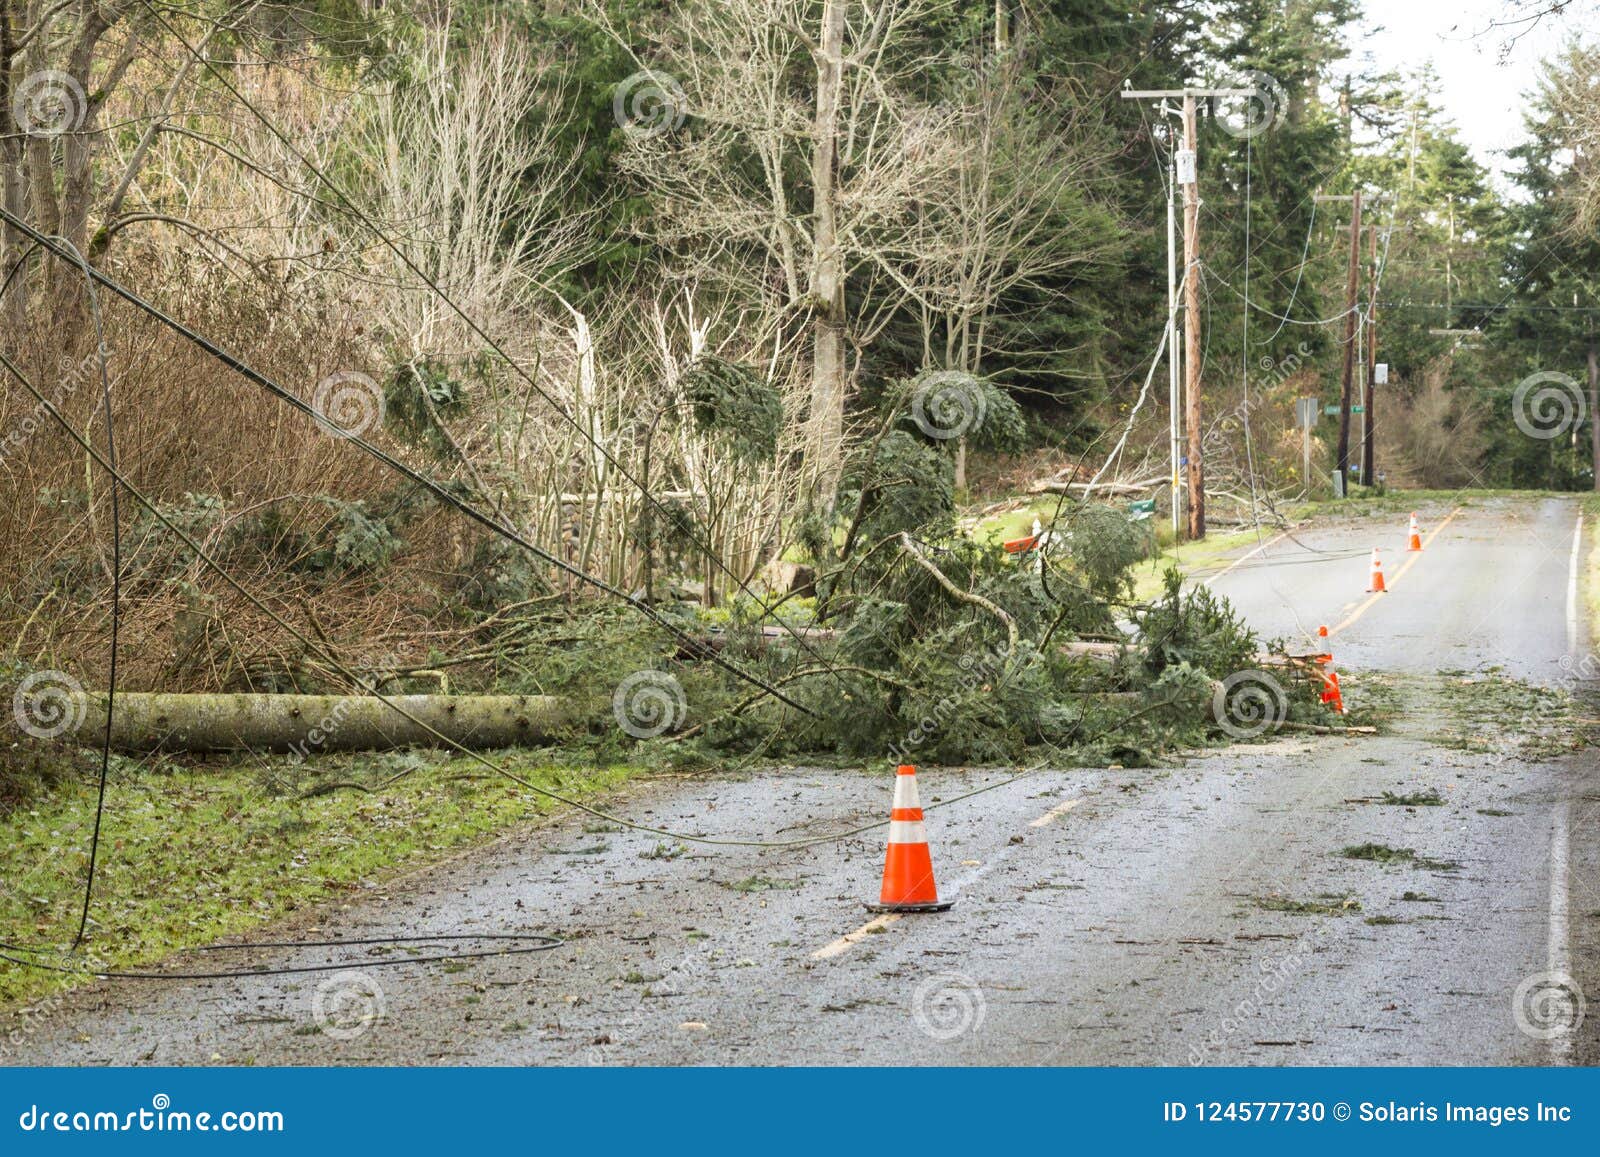 fallen trees and downed power lines blocking a road; hazards after a natural disaster wind storm